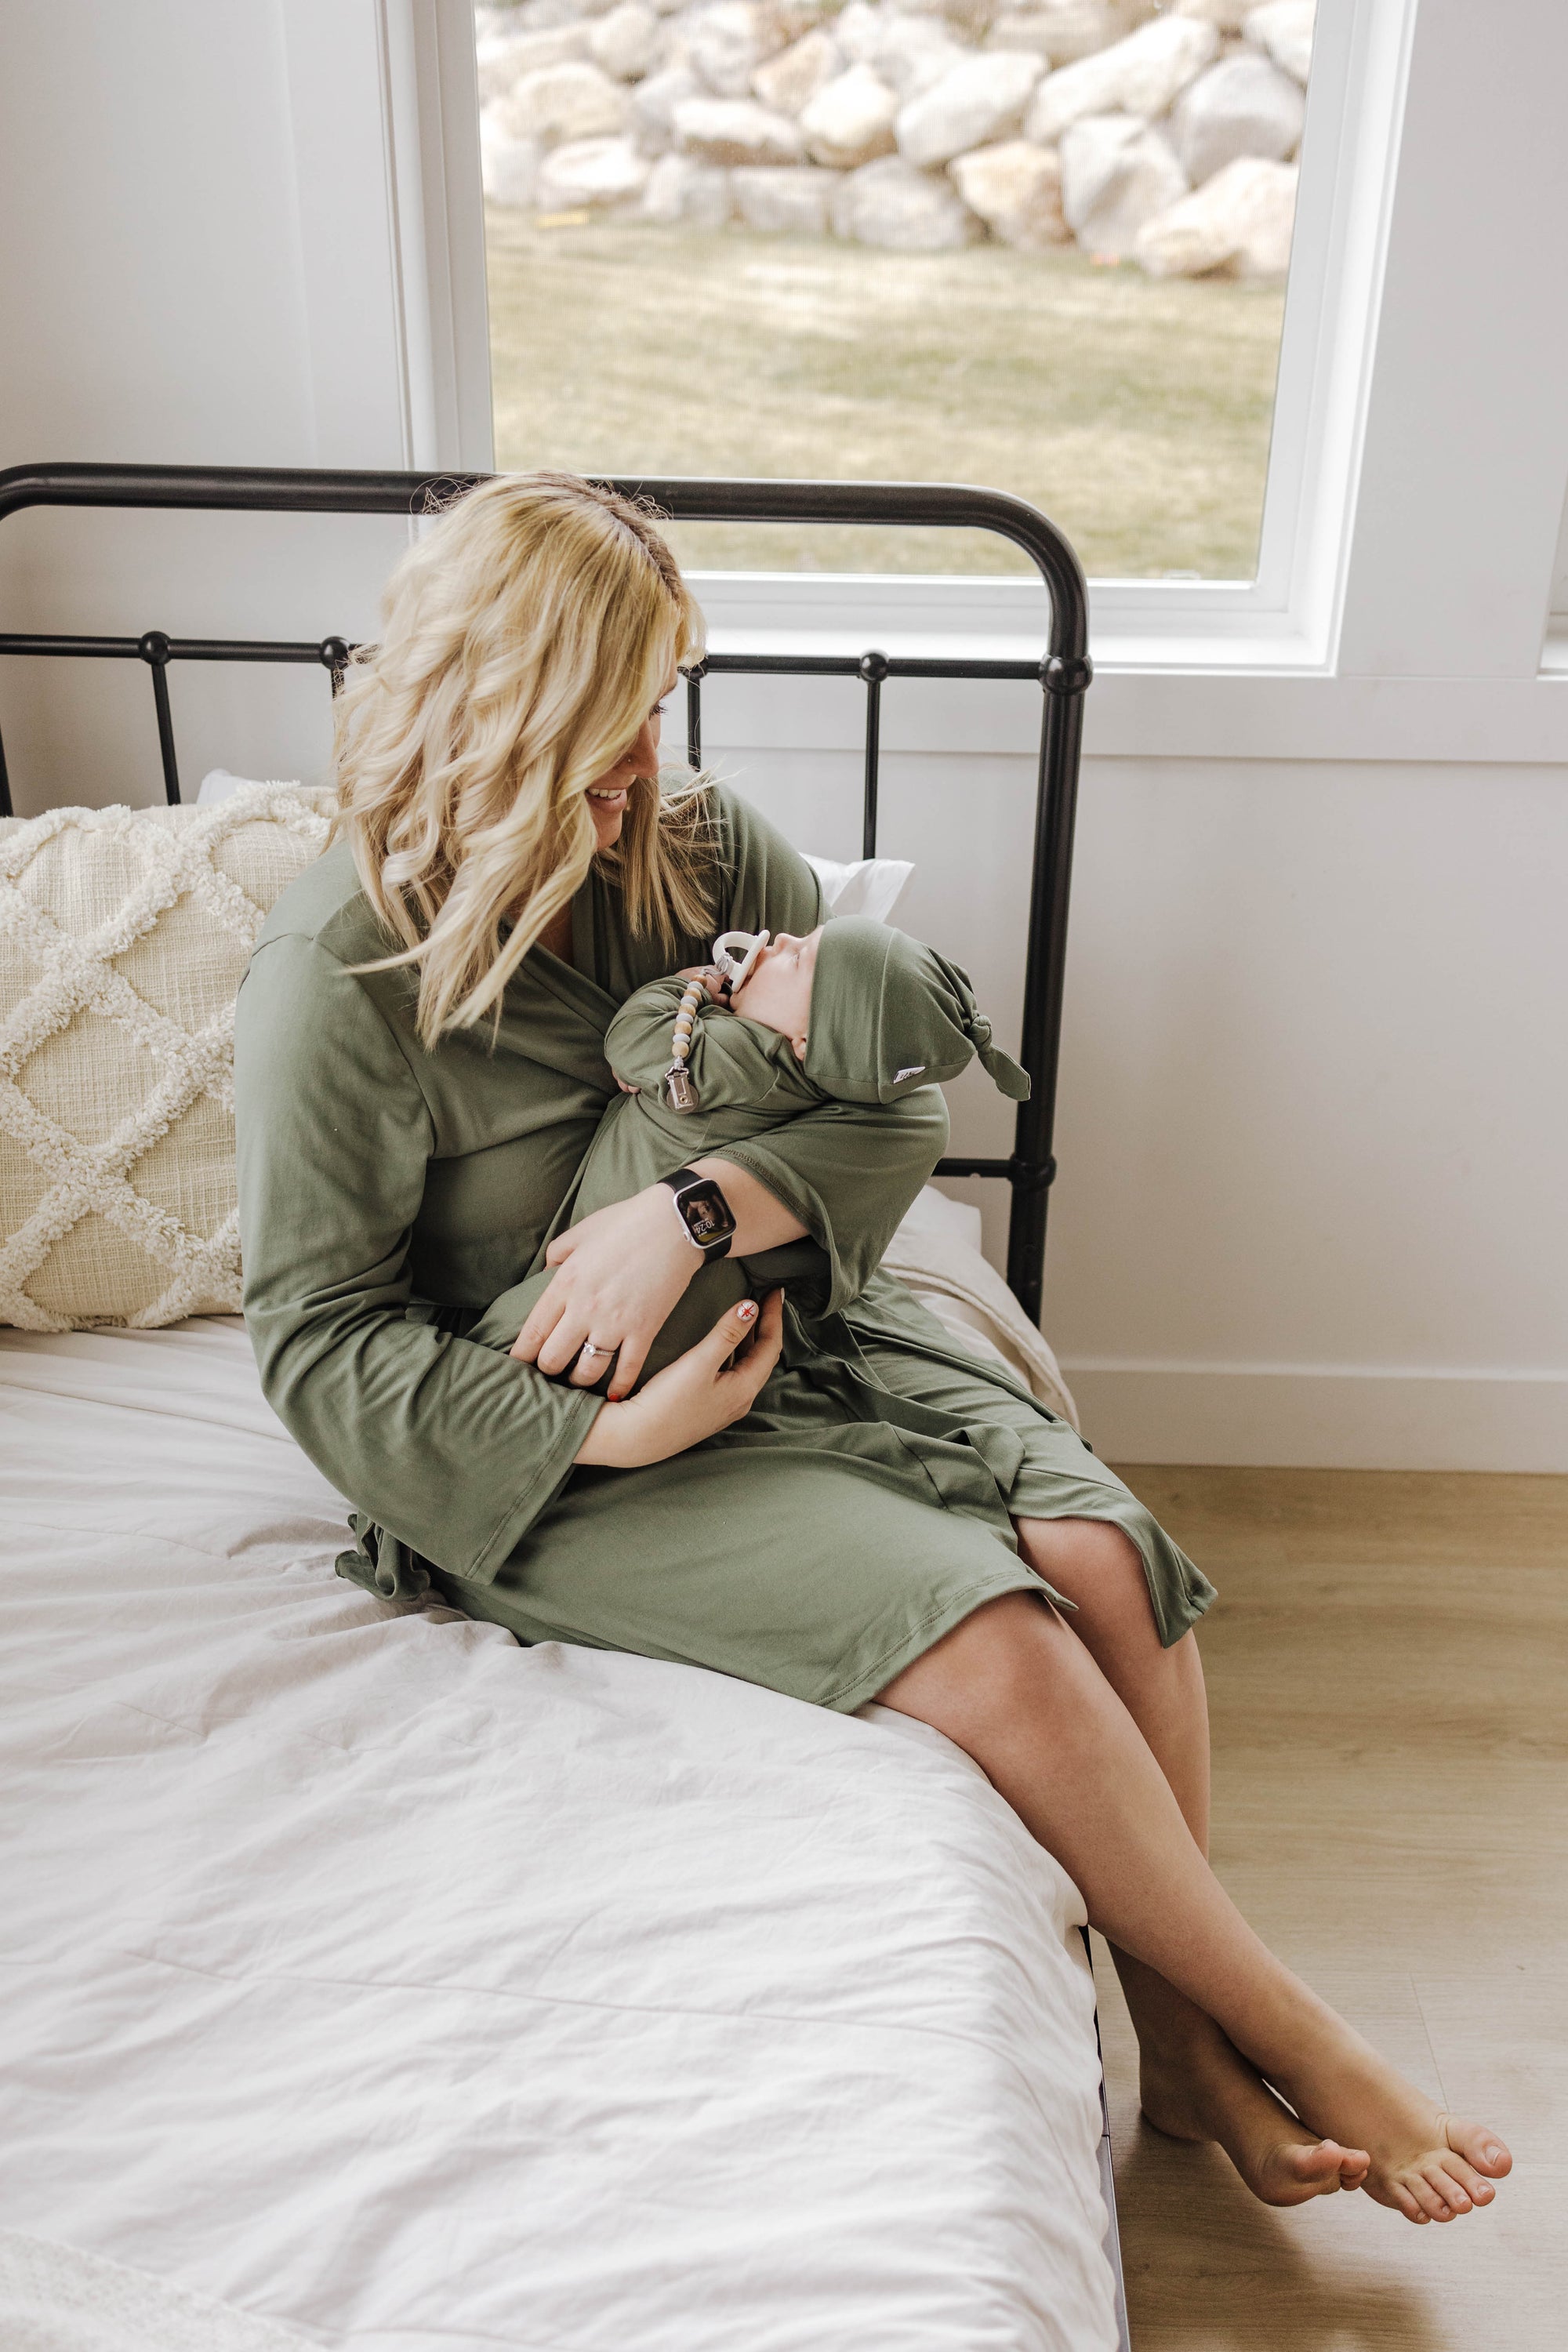 With the growing demand from our Mamas who purchase for their babies, we created a maternity collection. This line is designed to help the expecting mother feel beautiful, comfortable and stylish during her pregnancy. Our maternity collection features mod